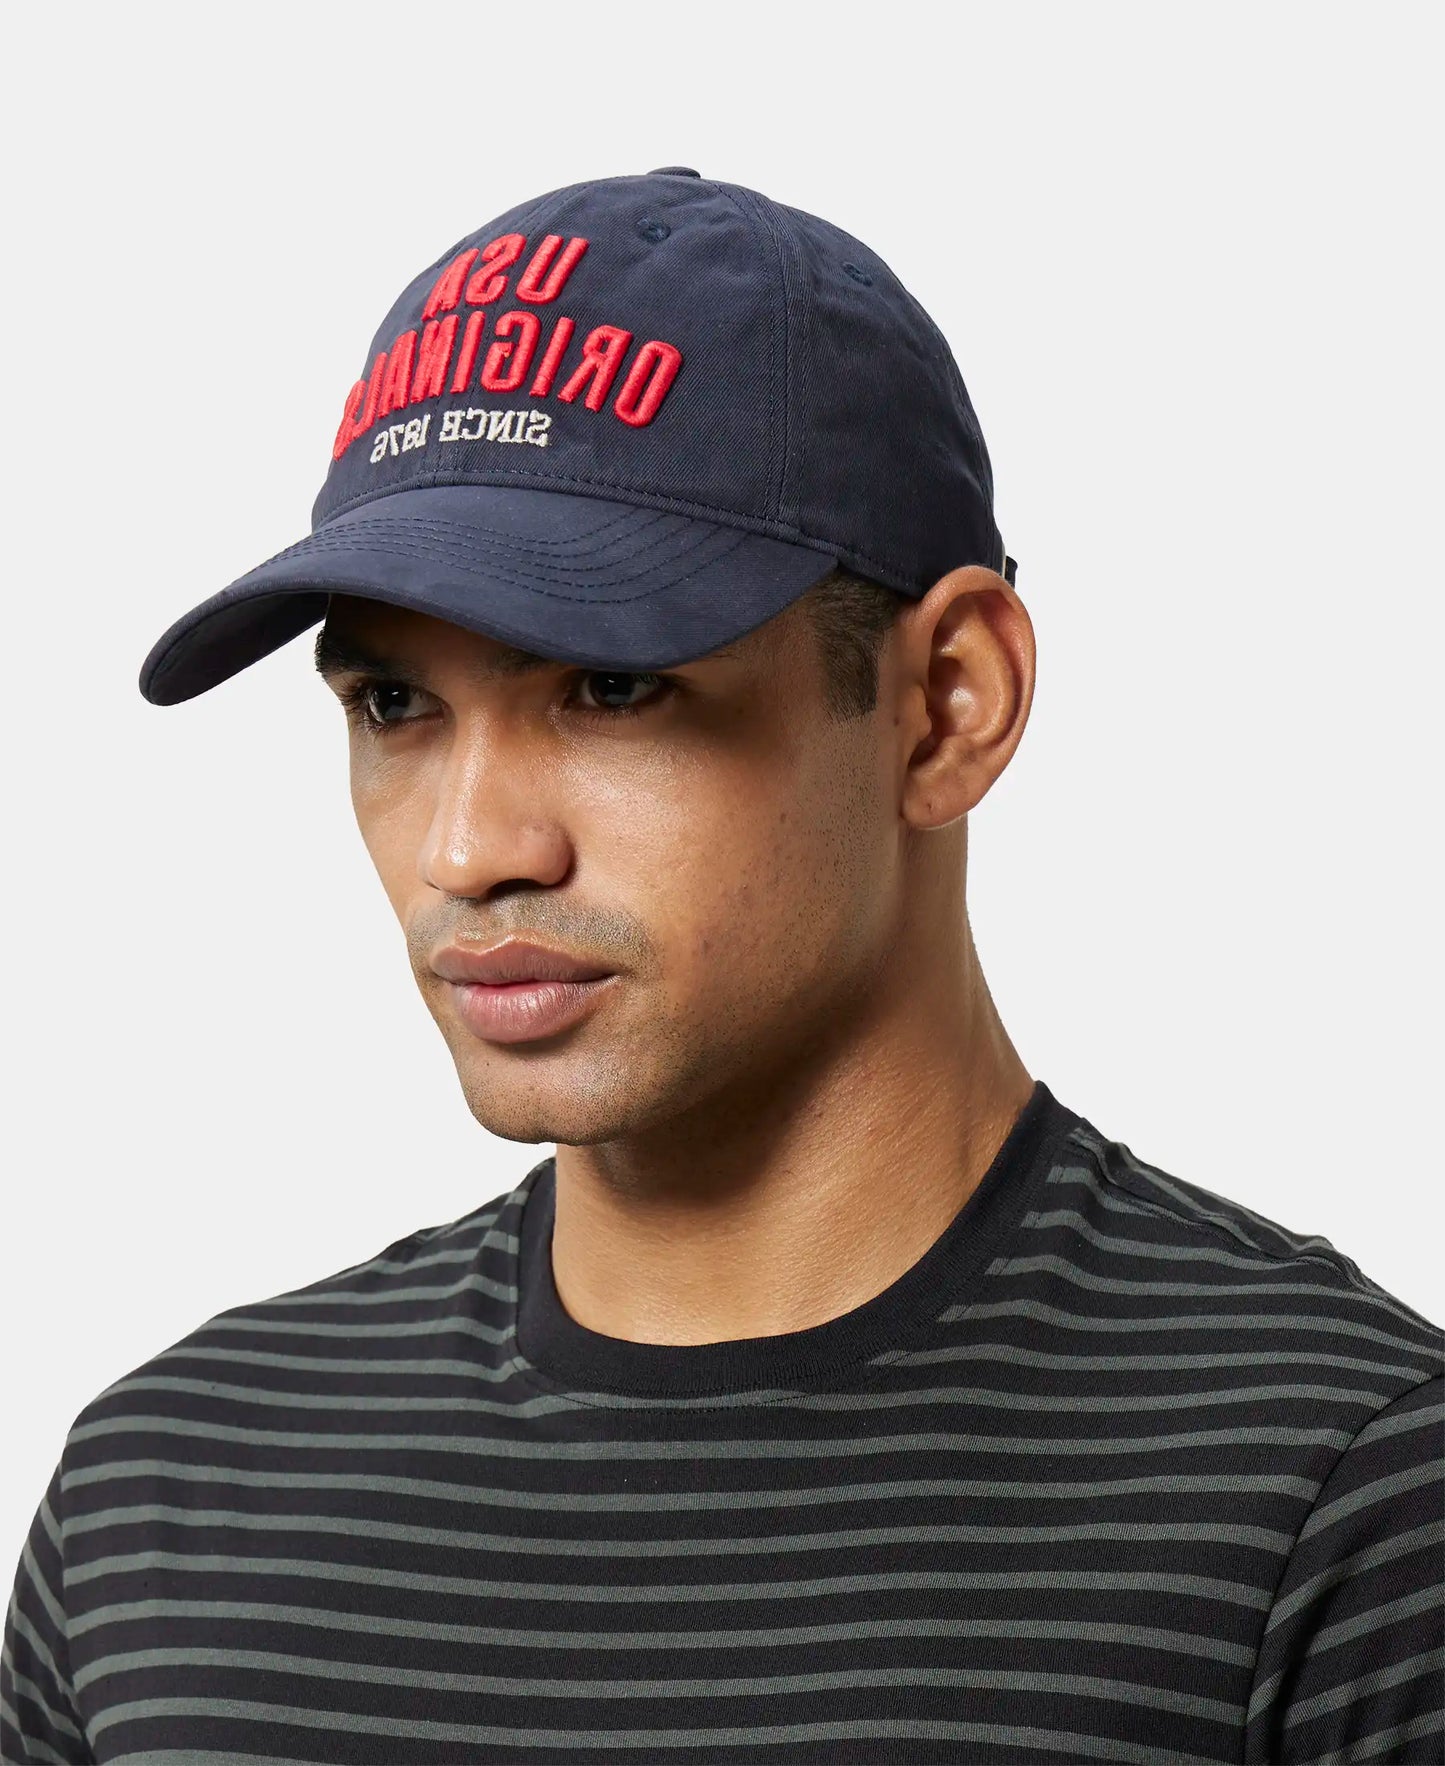 Super Combed Cotton Solid Cap with Adjustable Back Closure - Navy-4